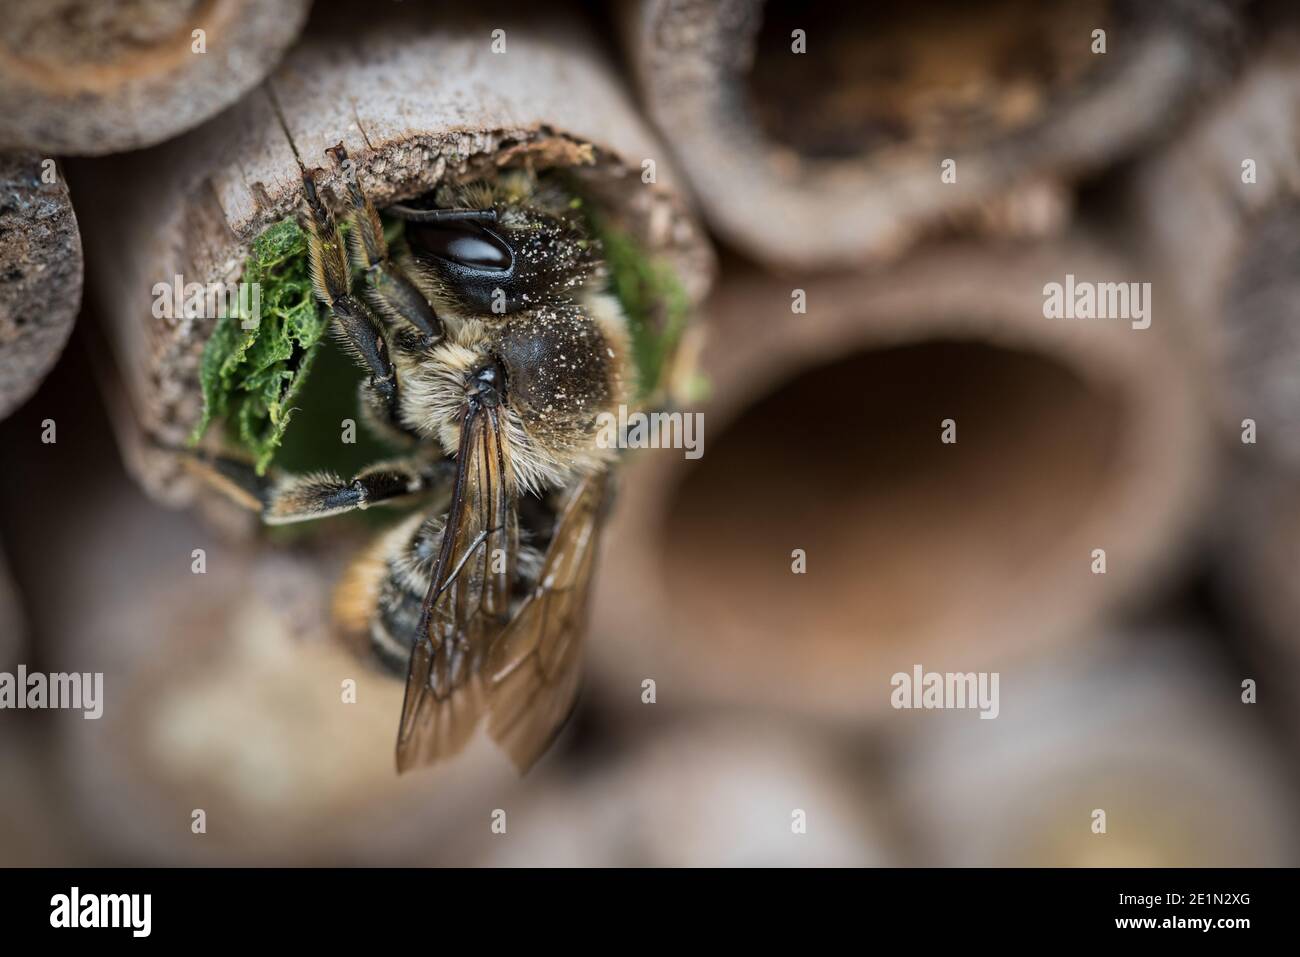 A leafcutter bee makes a nest in a bamboo tube in a garden in Exeter, Devon, UK. Stock Photo